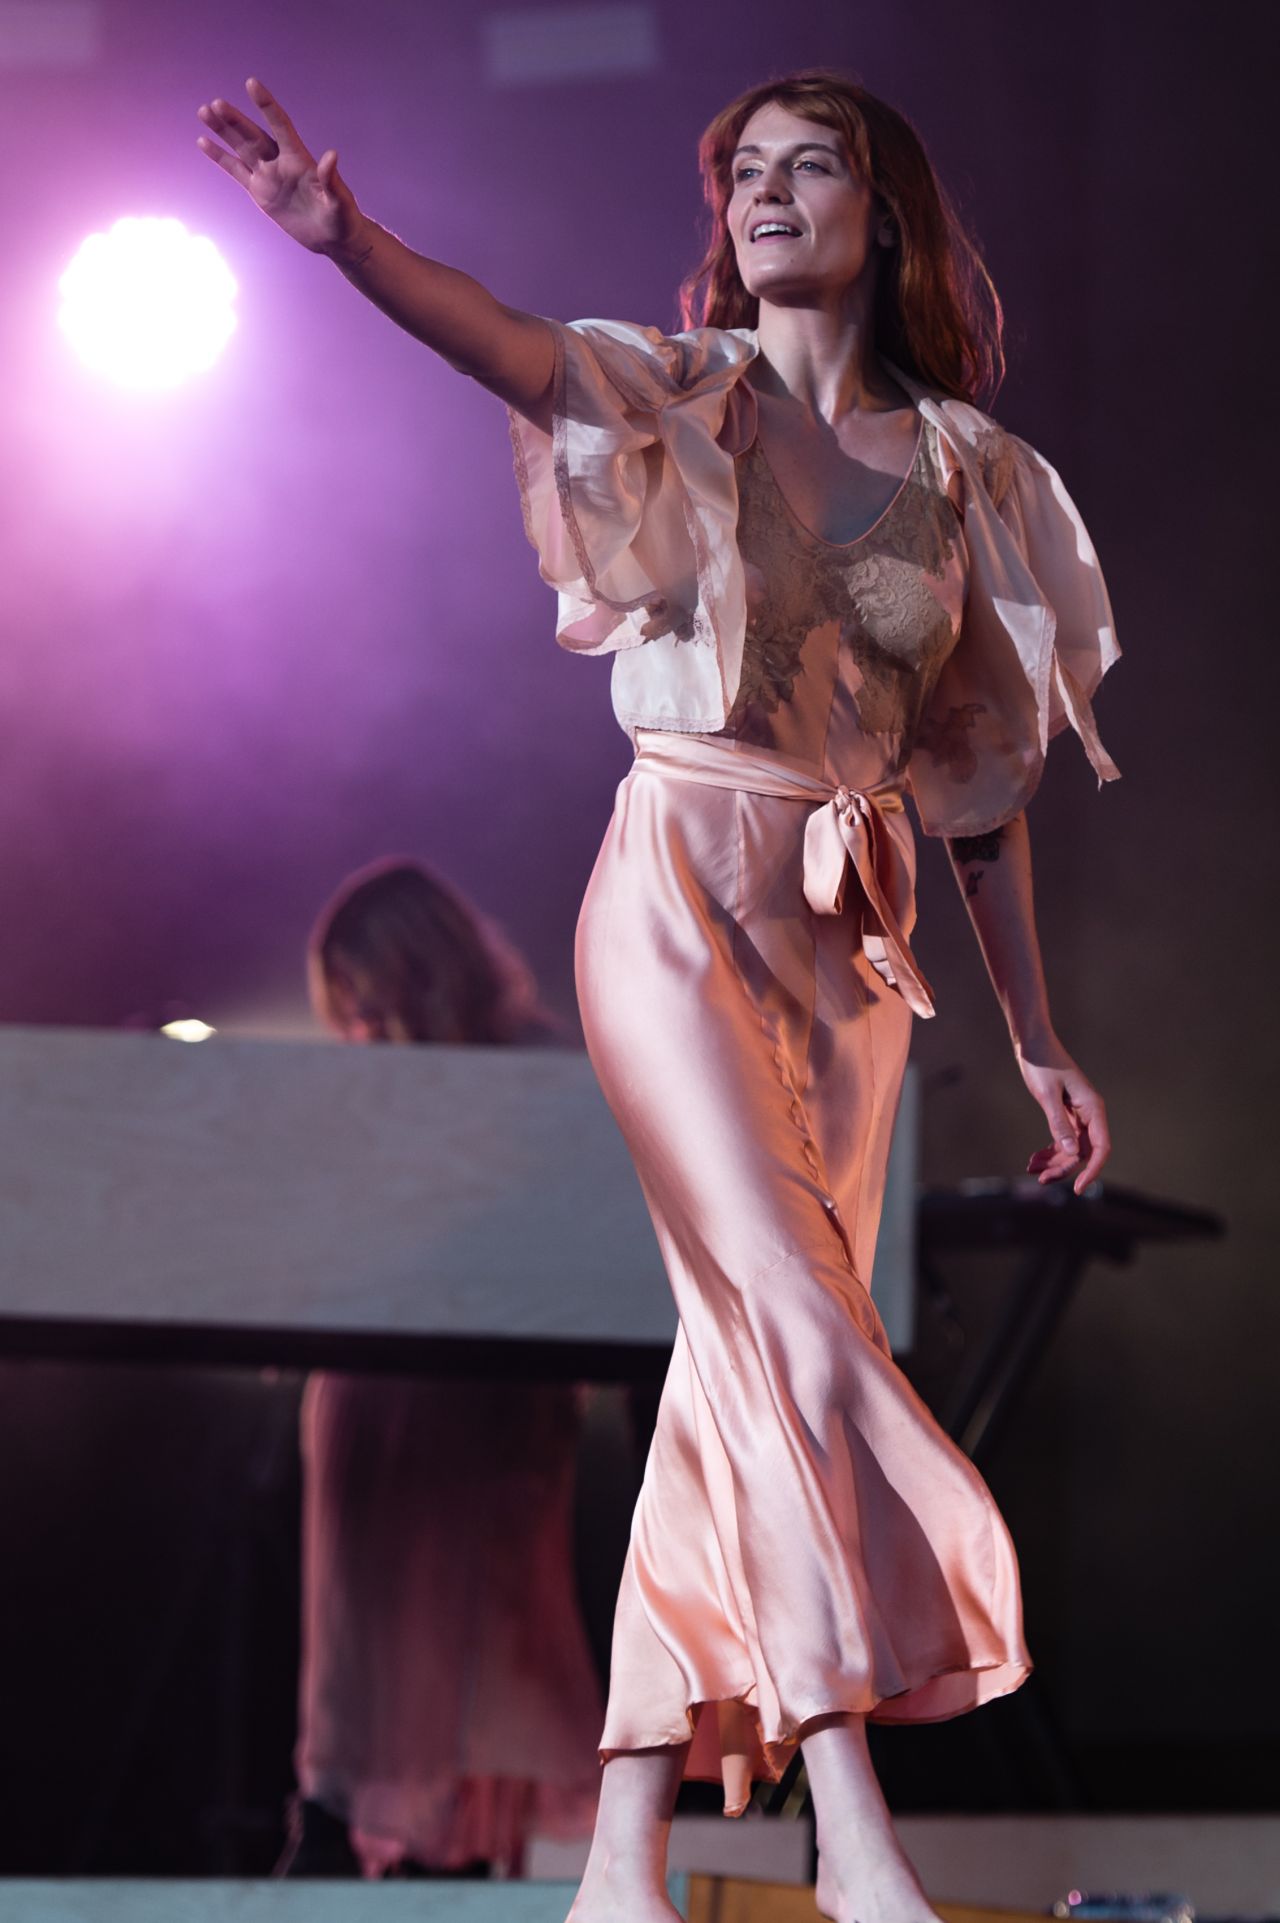 florence-welch-florence-and-the-machine-perform-at-bbc-the-biggest-weekend-festival-in-swansea-05-27-2018-1.jpg